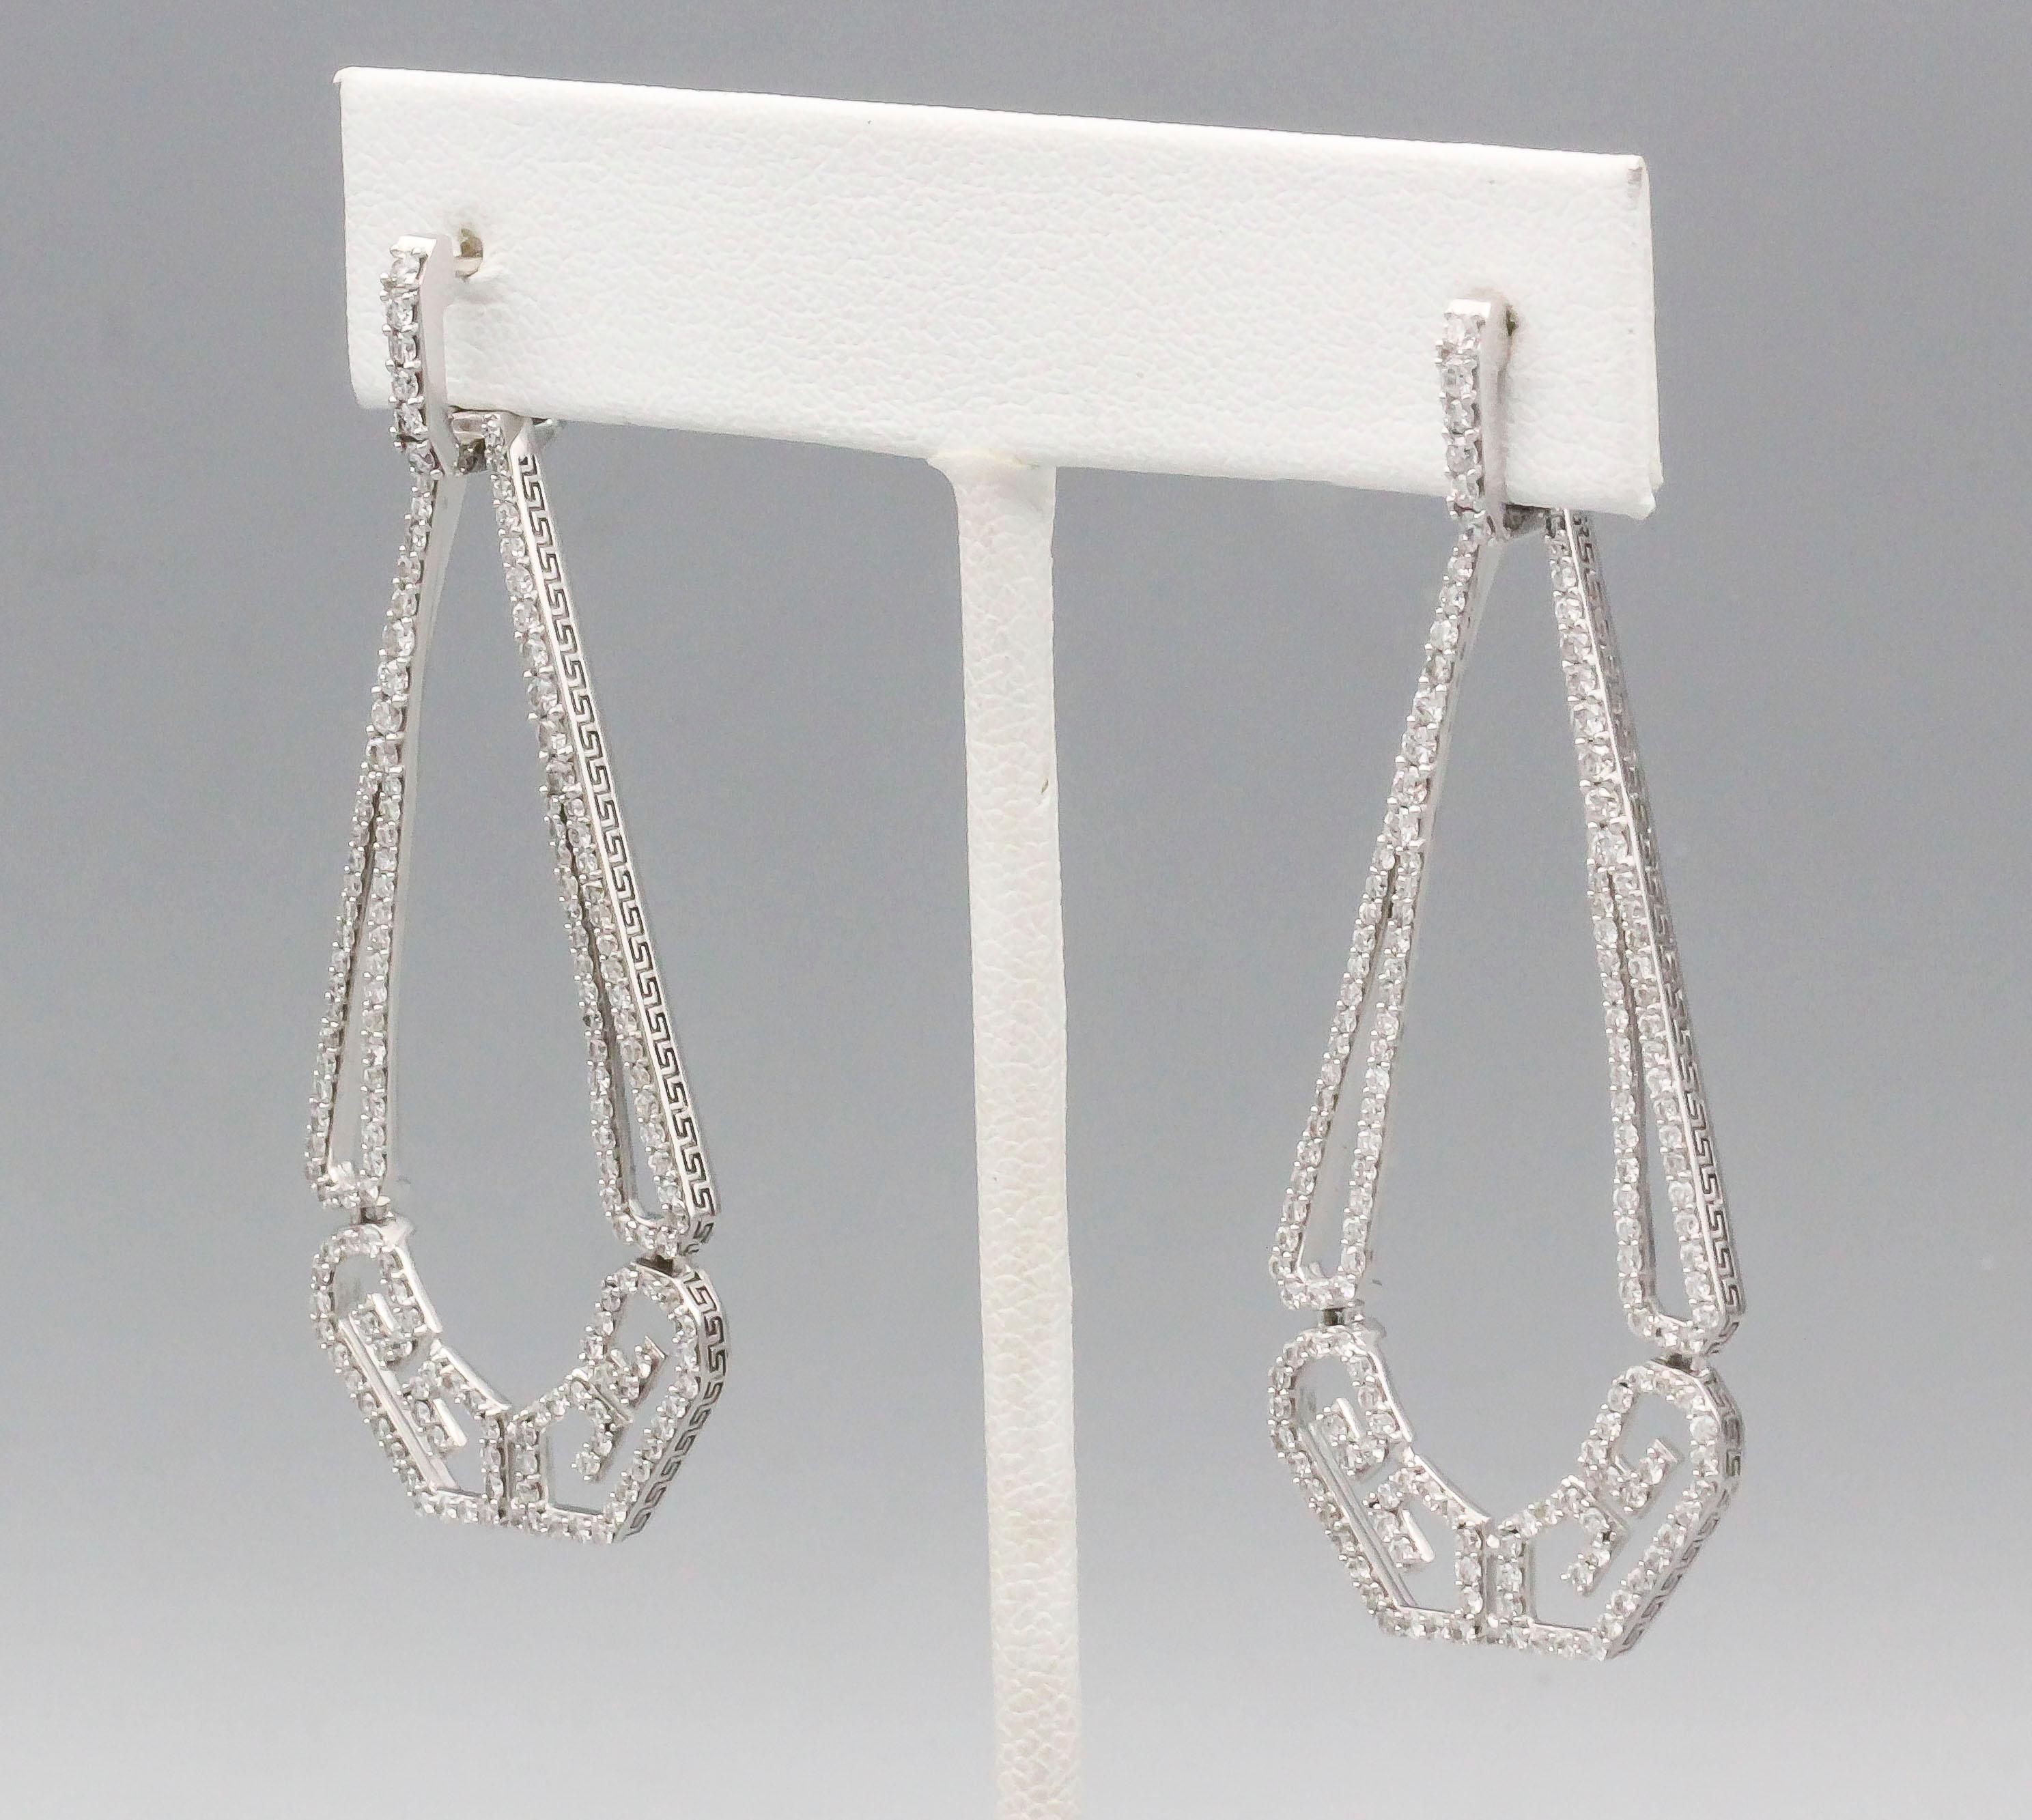 Fine diamond and 18K white gold drop earrings by Ivanka Trump. They feature high grade round cut diamonds throughout, approx. 1.5-2.0cts total weight.  The earrings are further decorated with a Greek key like pattern along its edges. Over 2 inches